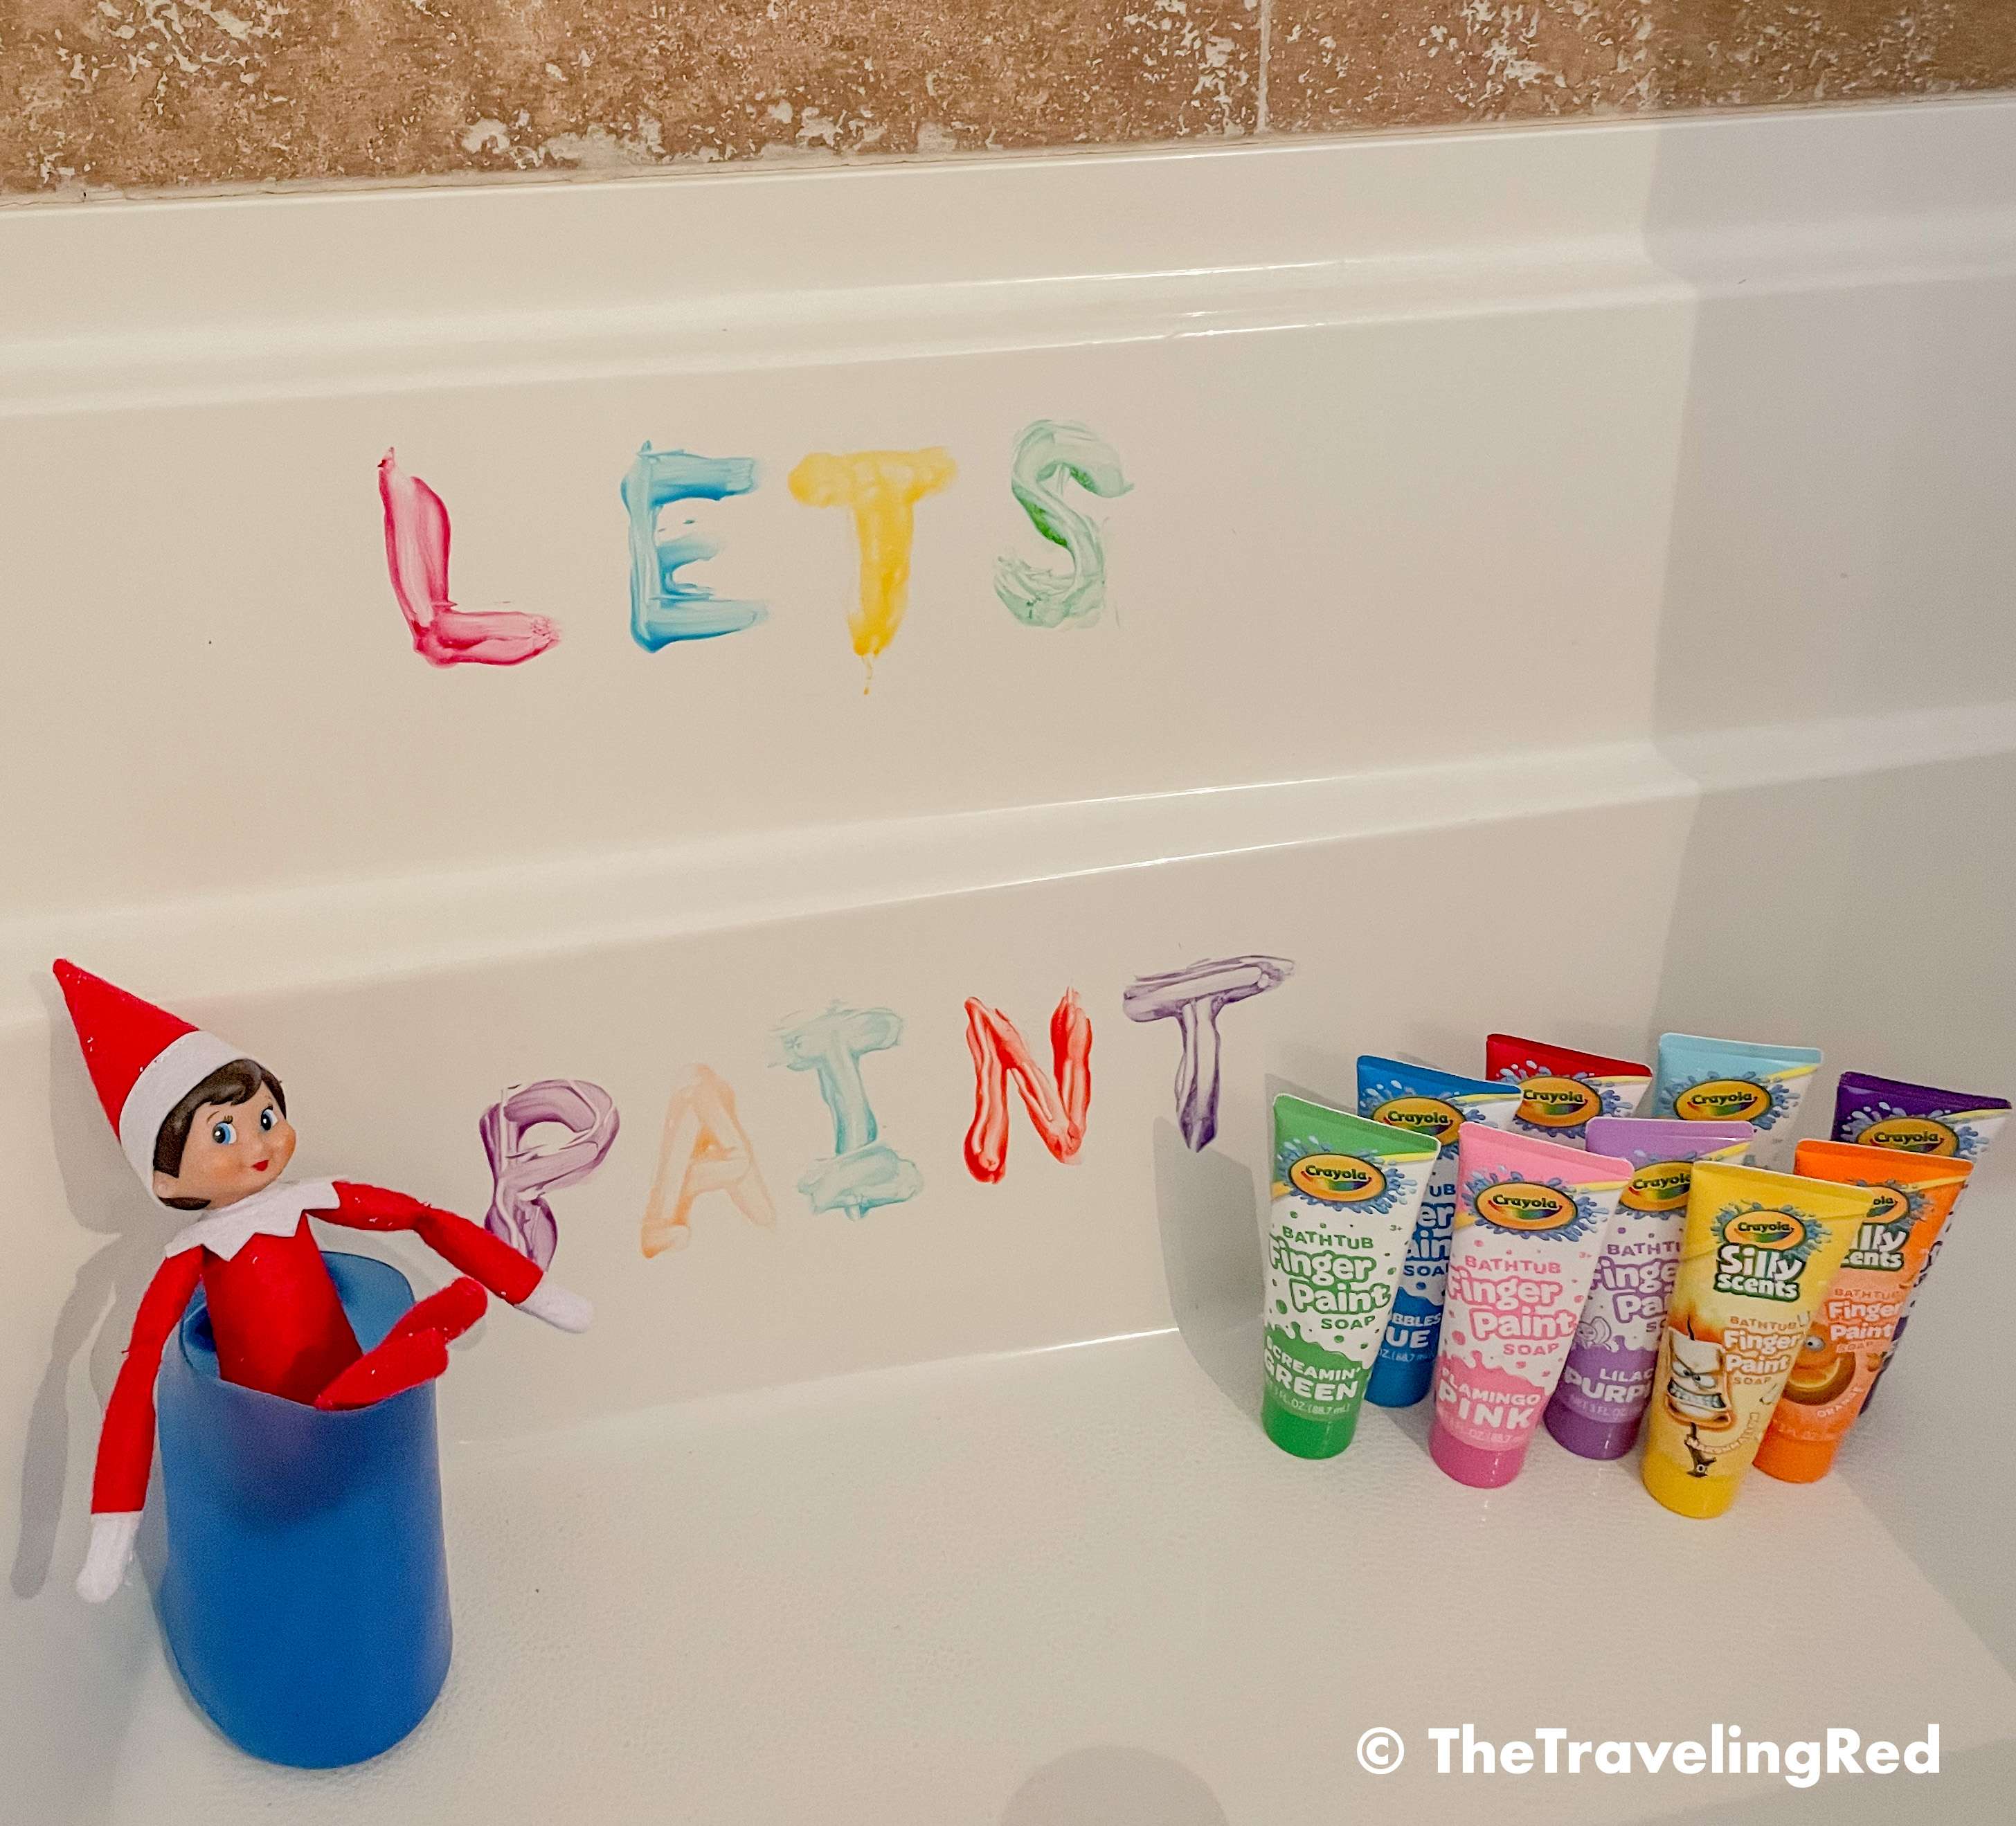 Naughty Elf on the shelf borrowed the bath paints and left a message in the bathtub. Use paints for a fun message. Fun and easy elf on the shelf ideas for a naughty elf that are quick and easy using things you have at home.